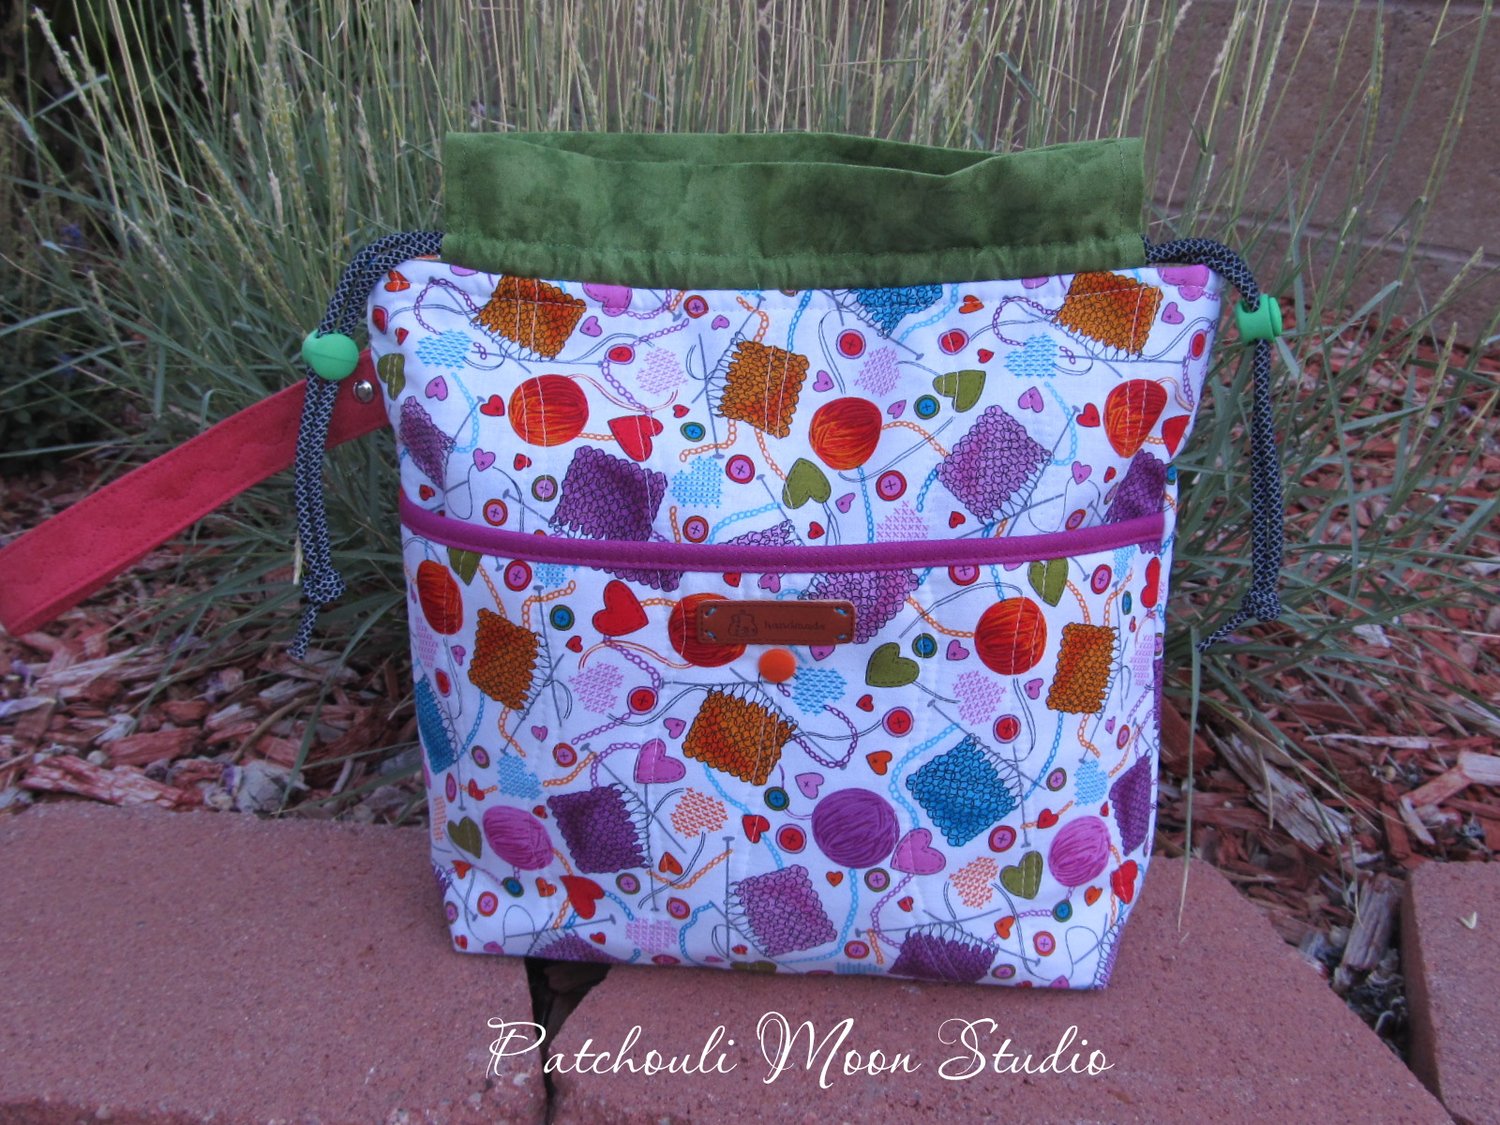 Project Bag for Knitting or Crochet - Free Sewing Tutorial